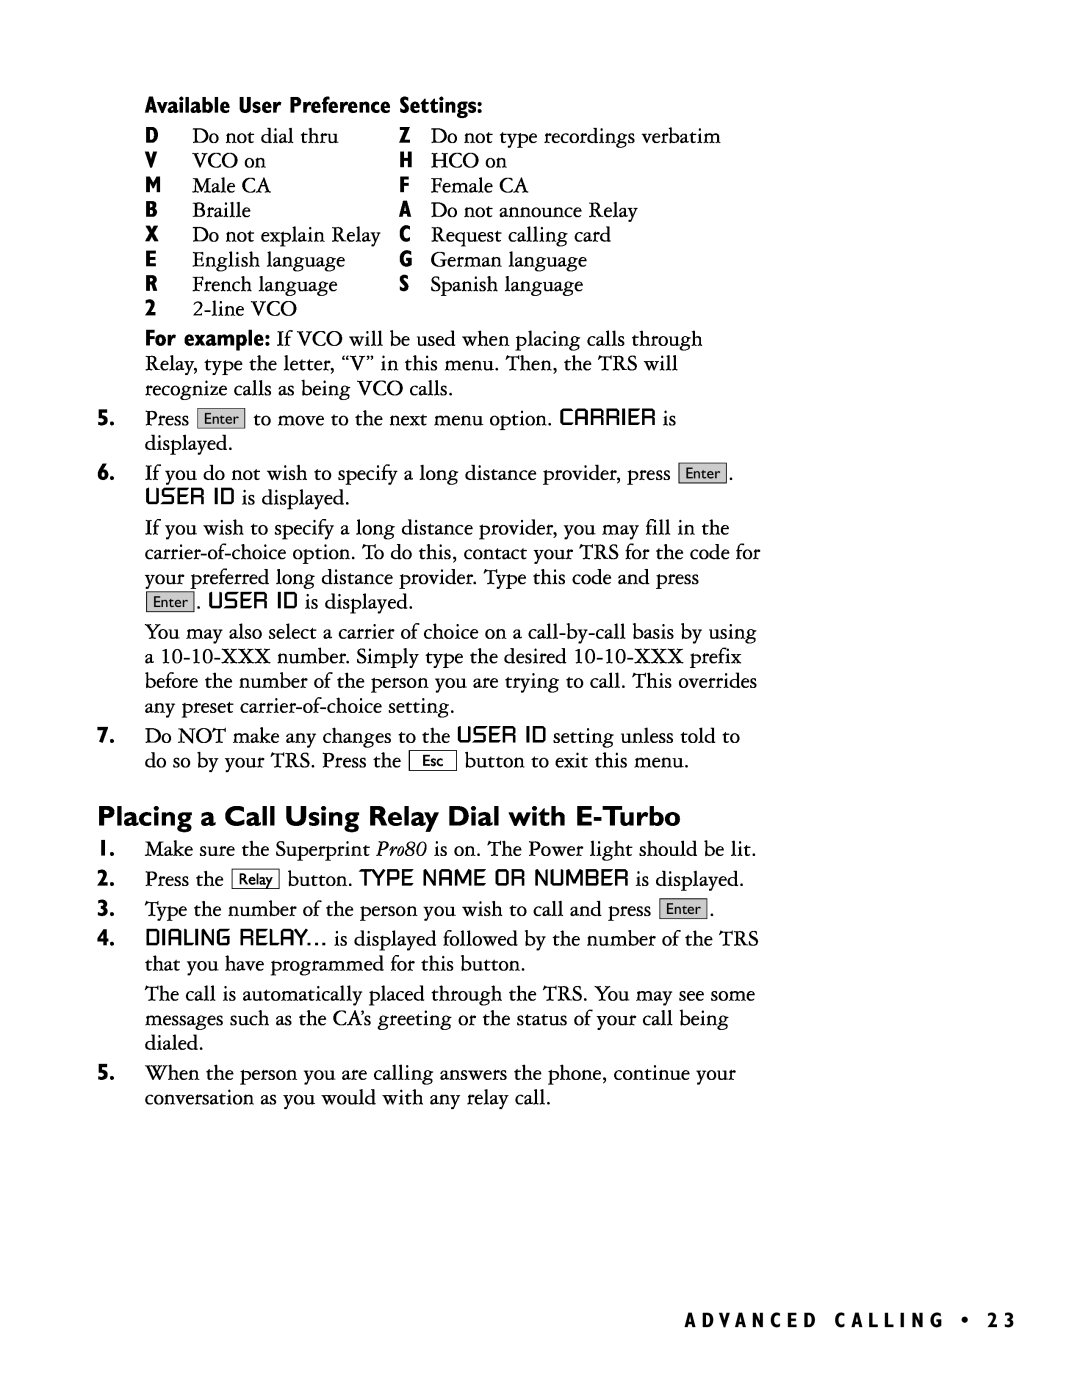 Ultratec PRO80TM manual Placing a Call Using Relay Dial with E-Turbo, Available User Preference Settings 